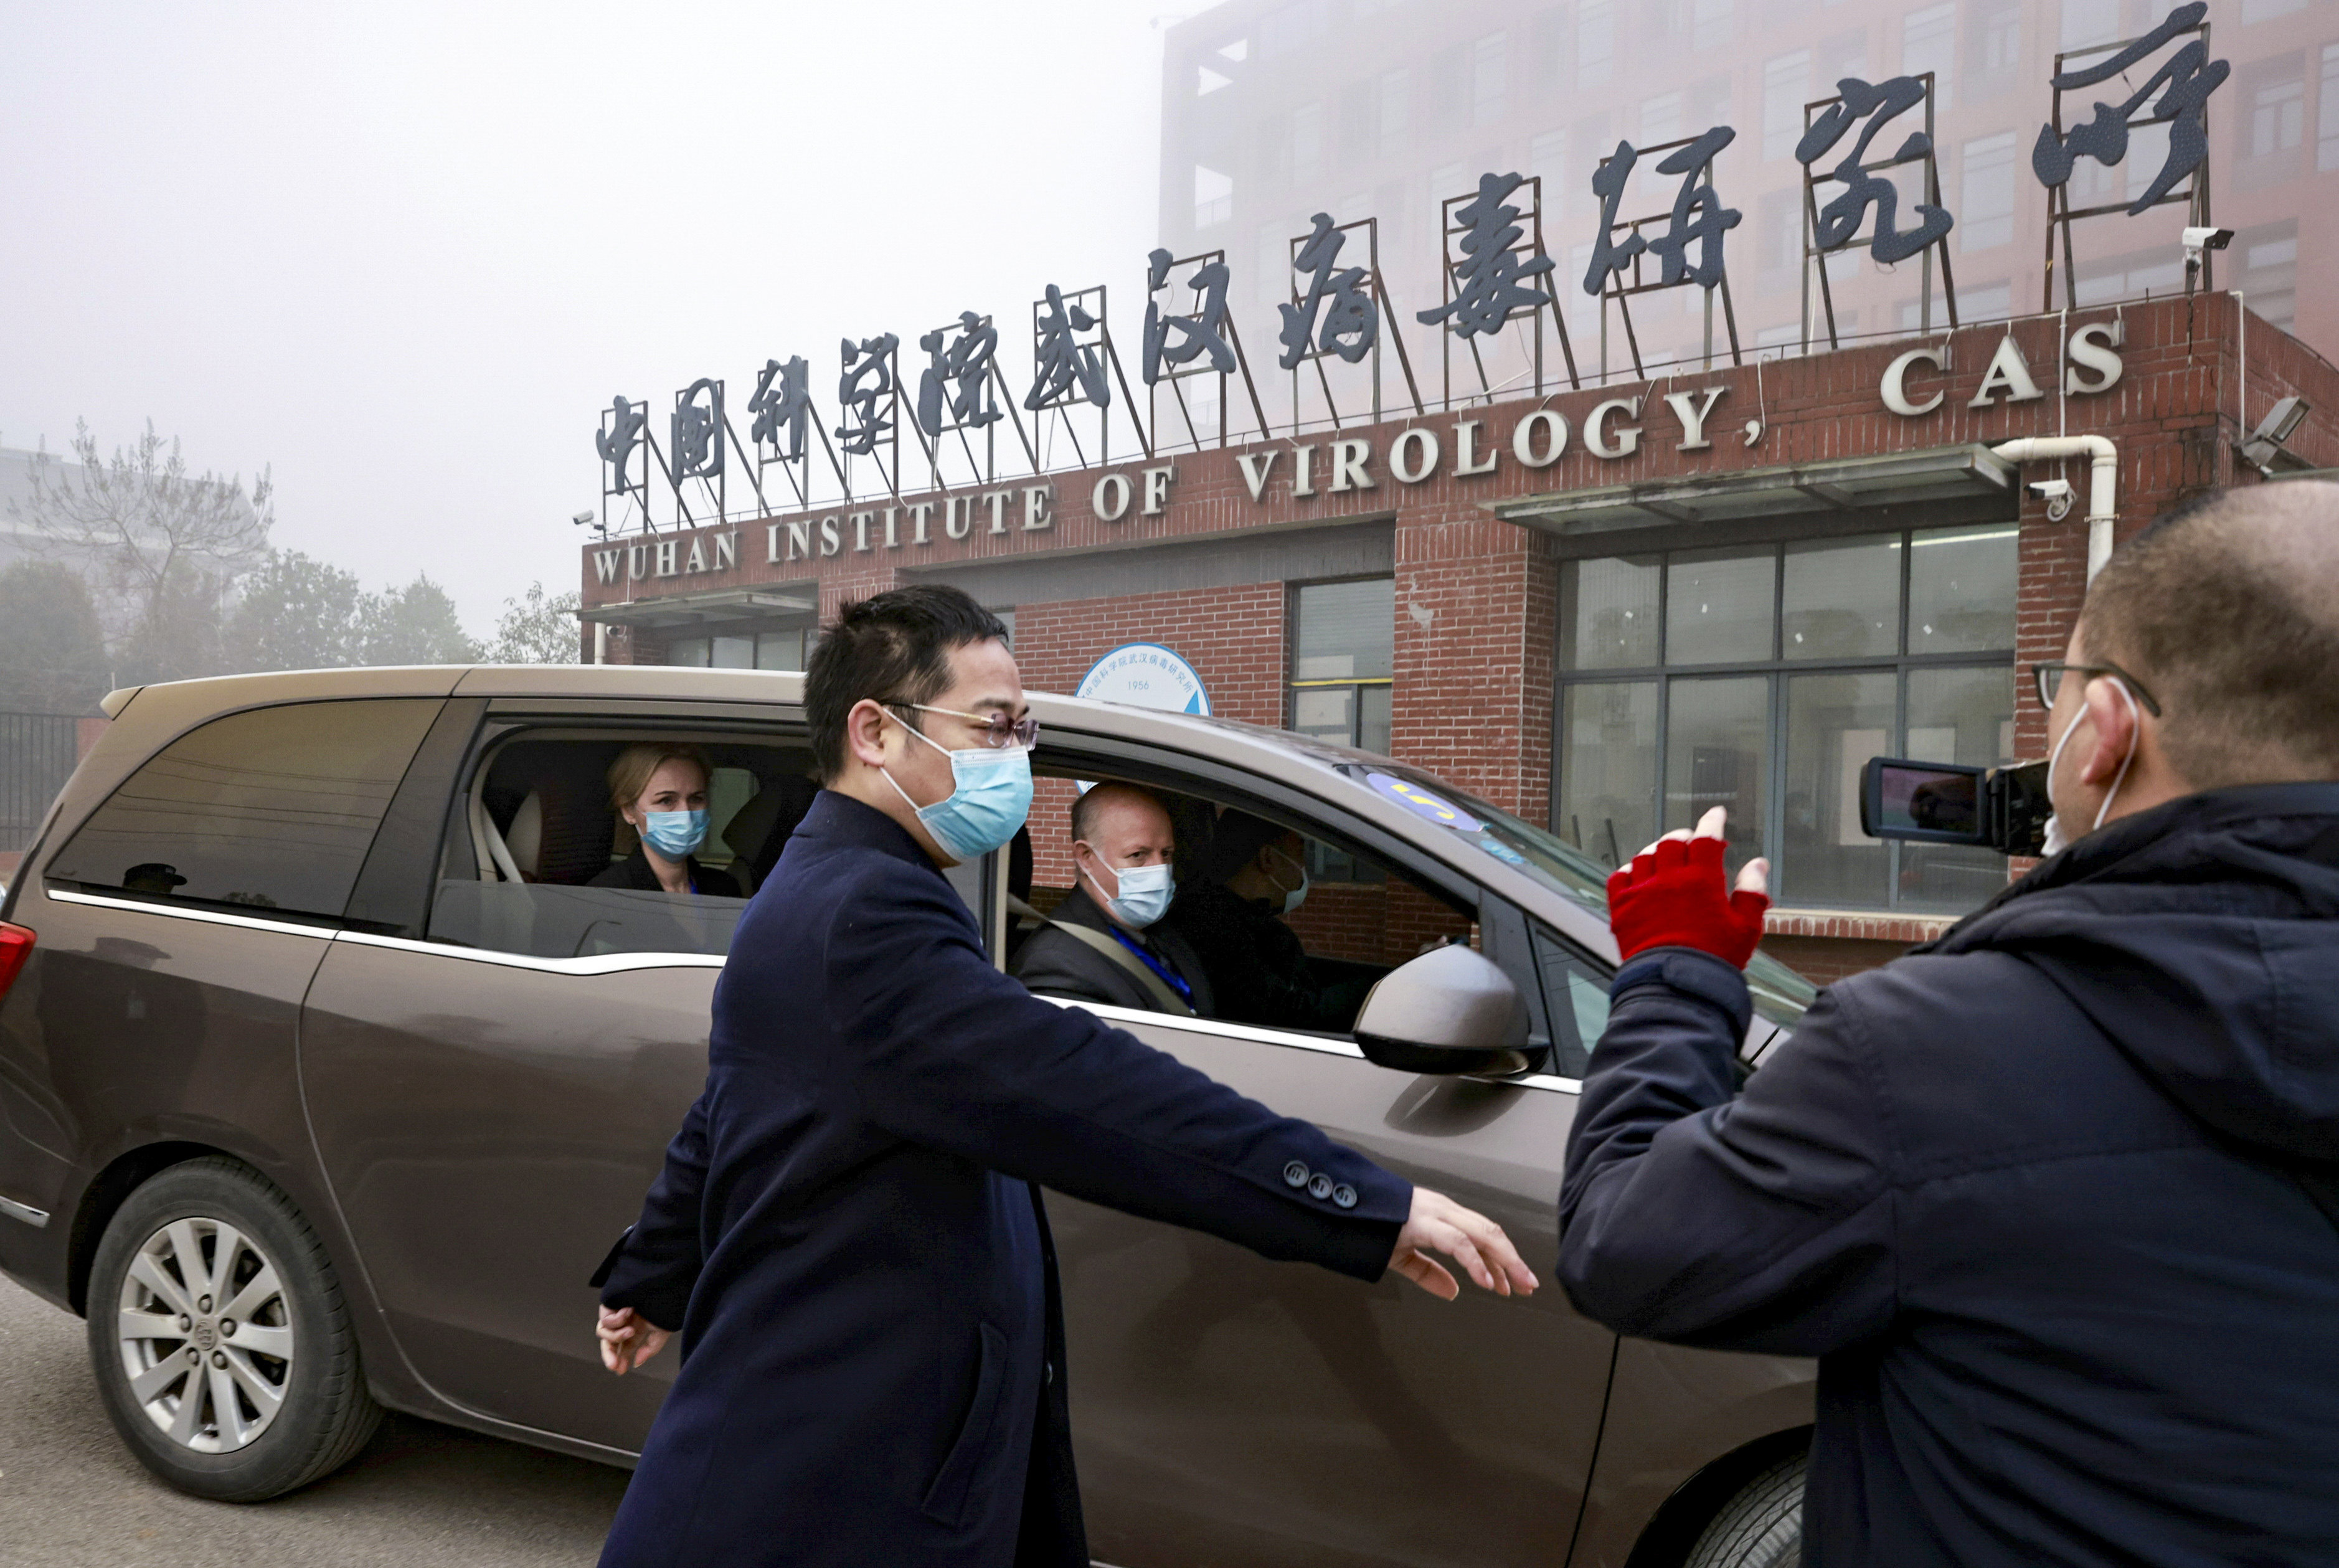 Peter Daszak, the head of EcoHealth Alliance, and other members of the WHO team tasked with investigating the origins of the coronavirus sit in a car arriving at the Wuhan Institute of Virology. Photo: Reuters